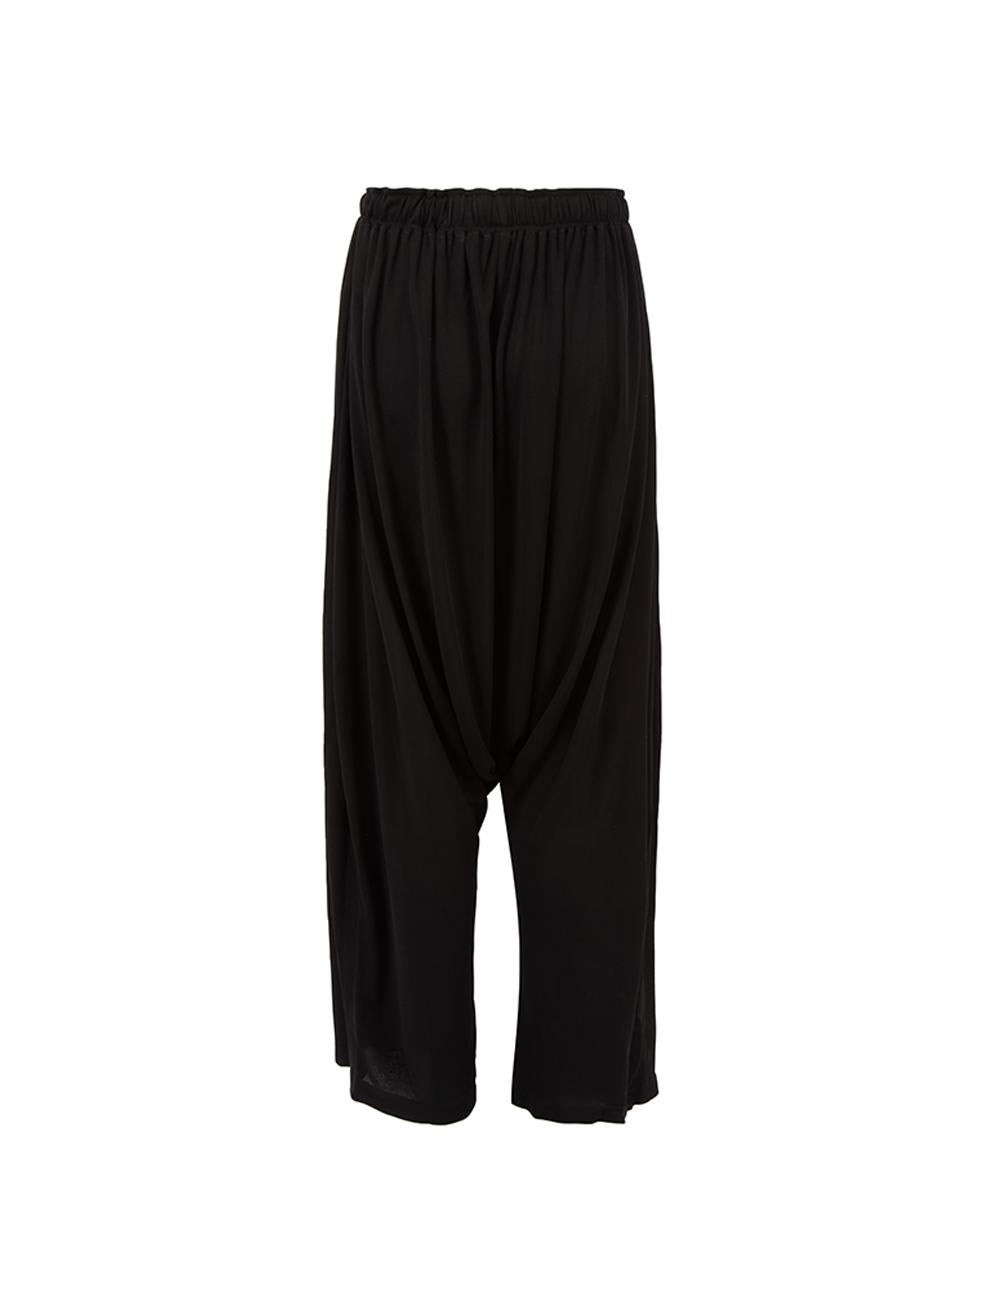 Loewe Women's Black High Rise Sagging Trousers In Good Condition For Sale In London, GB